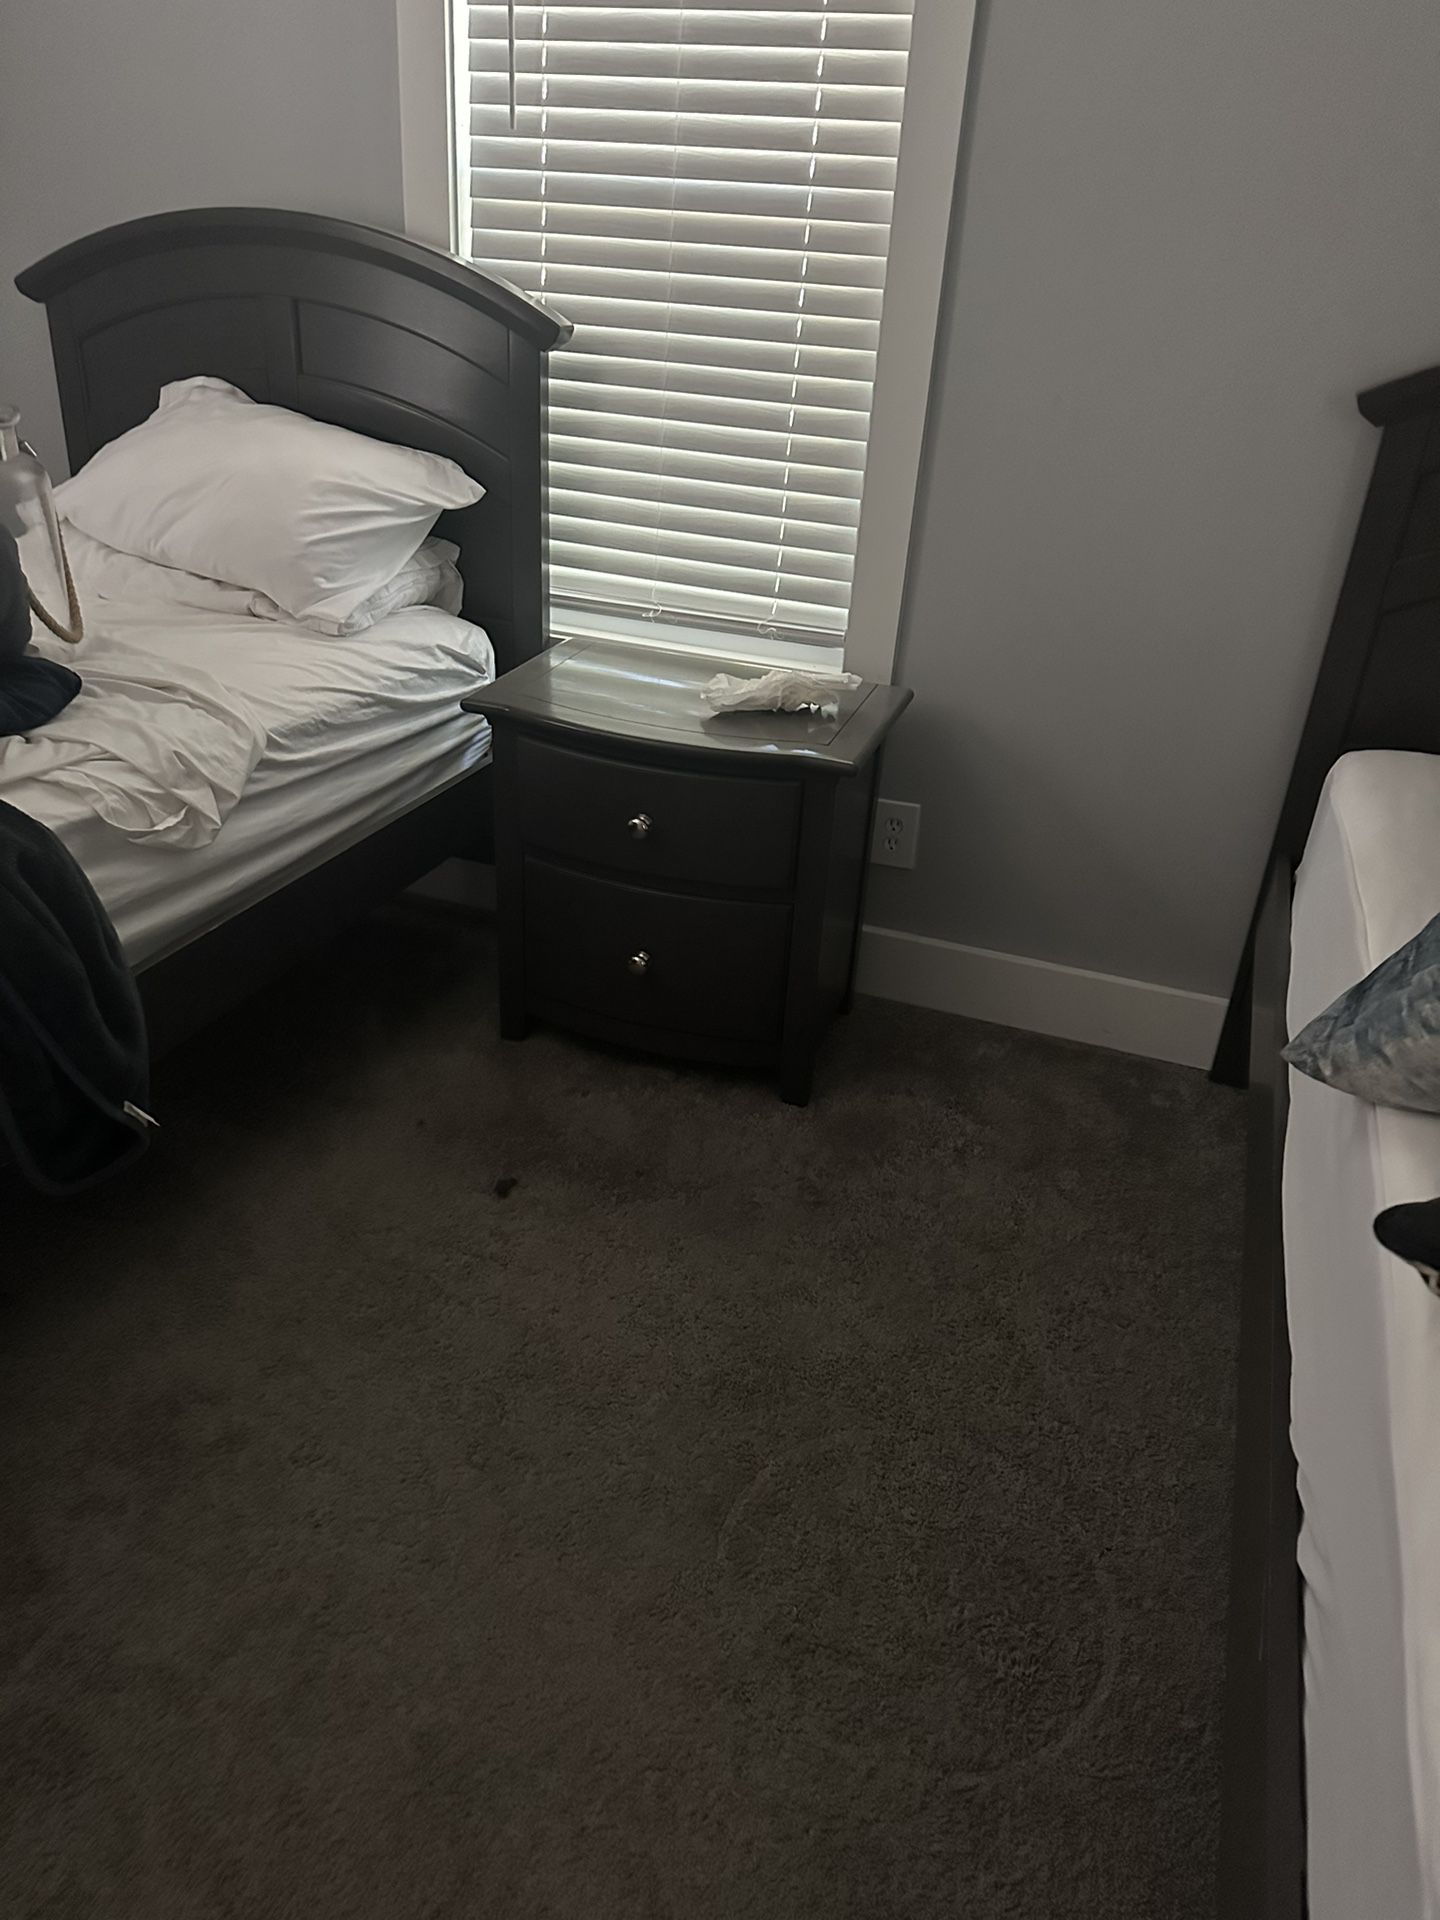 2 Twin Beds With Nightstand And Mattress